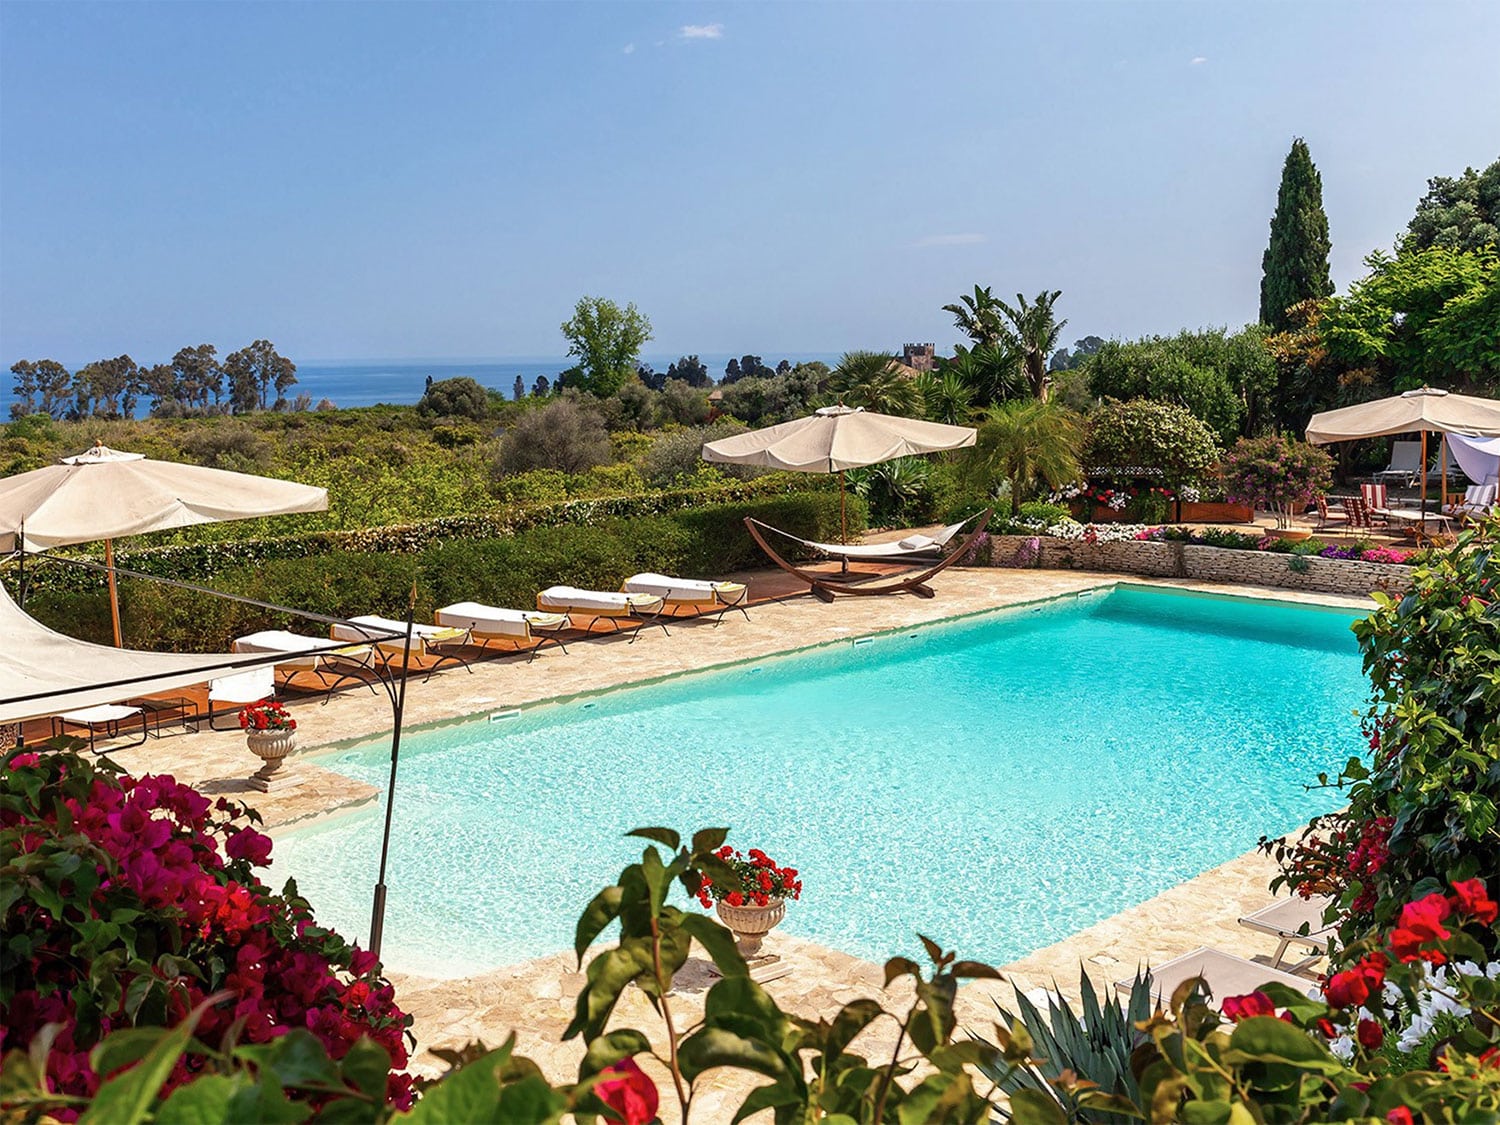 The pool at Don Arcangelo all'Olmo, a luxurious 12-bedroom villa in Taormina, Sicily, Italy.